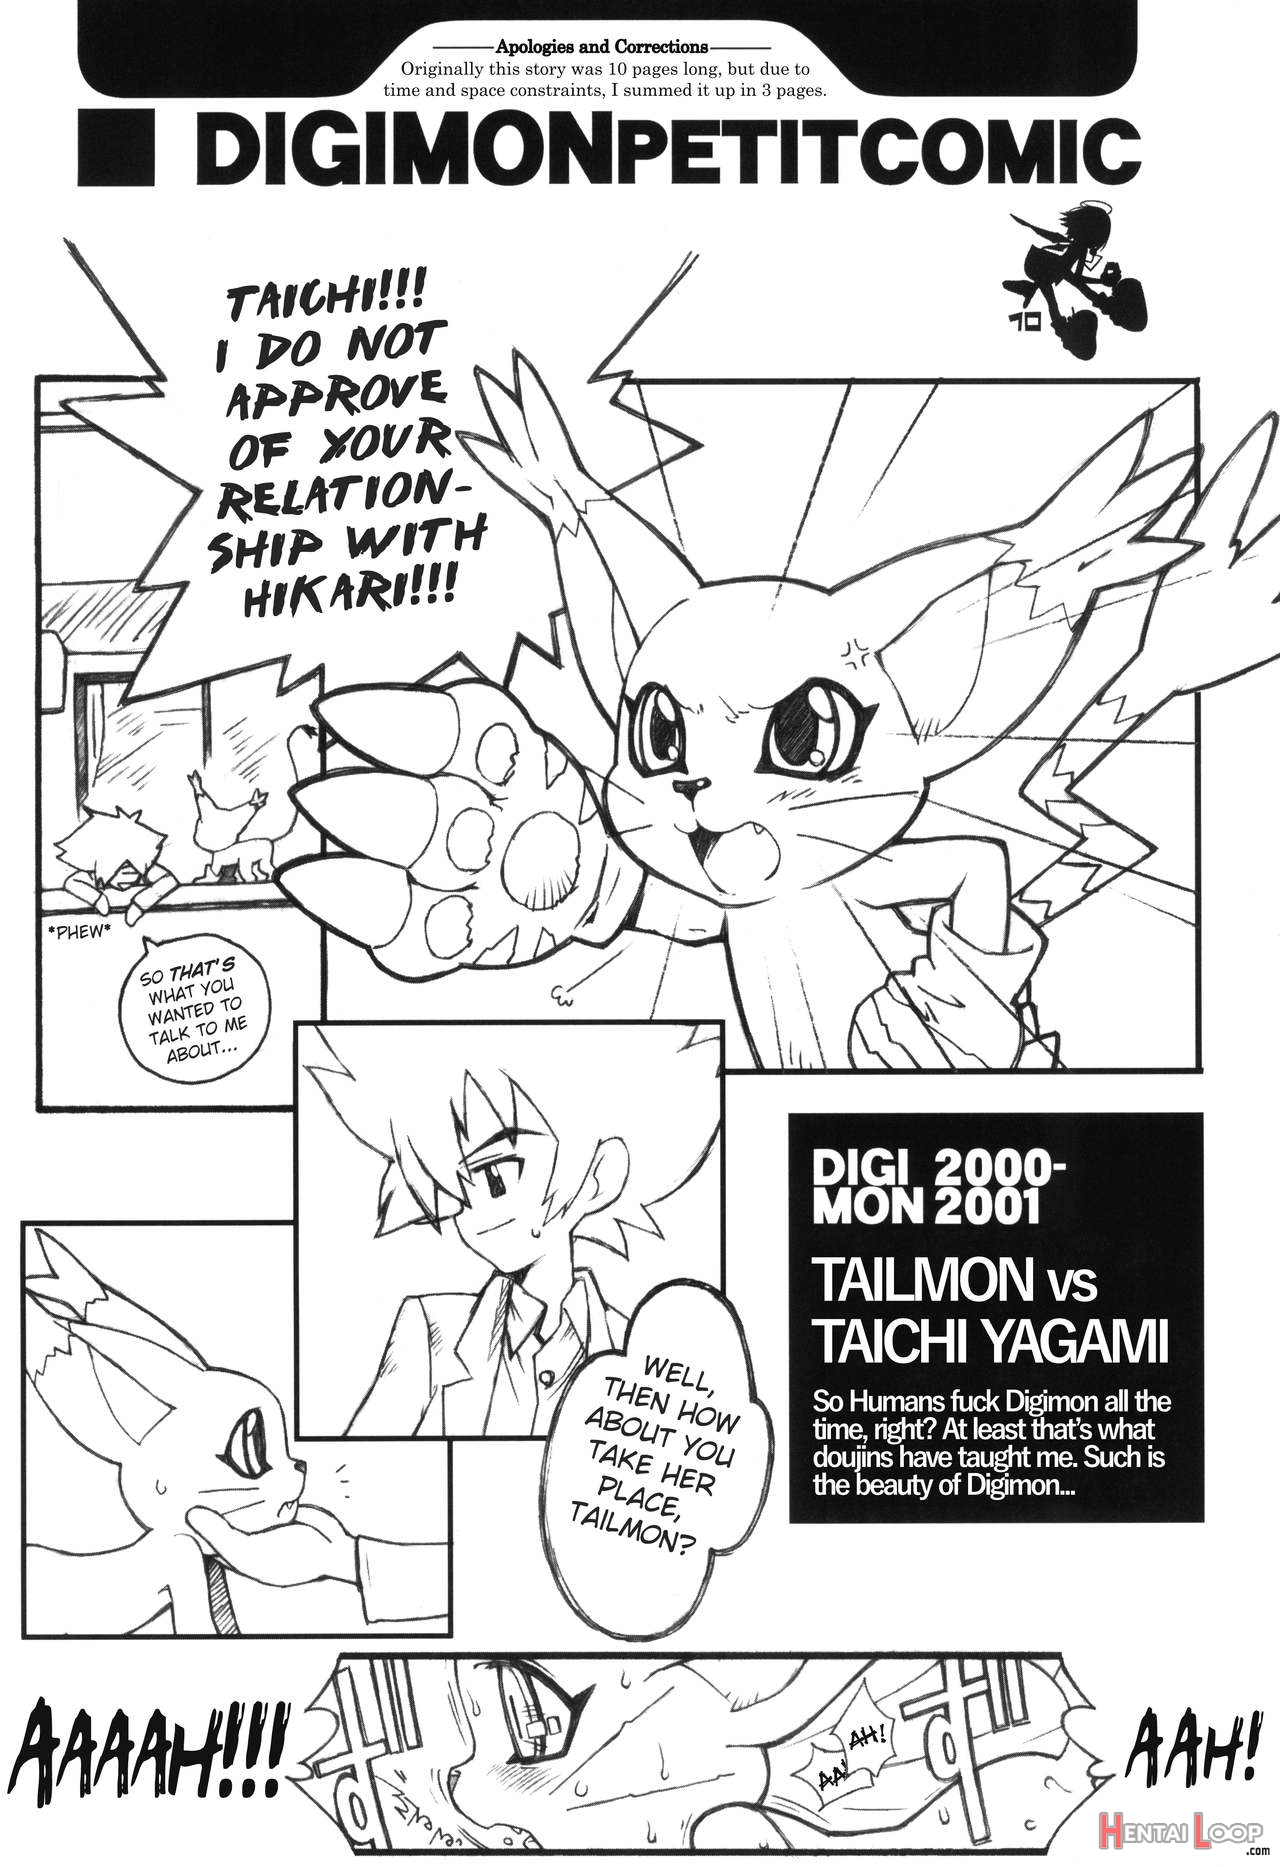 Digimon Queen 01+ page 9